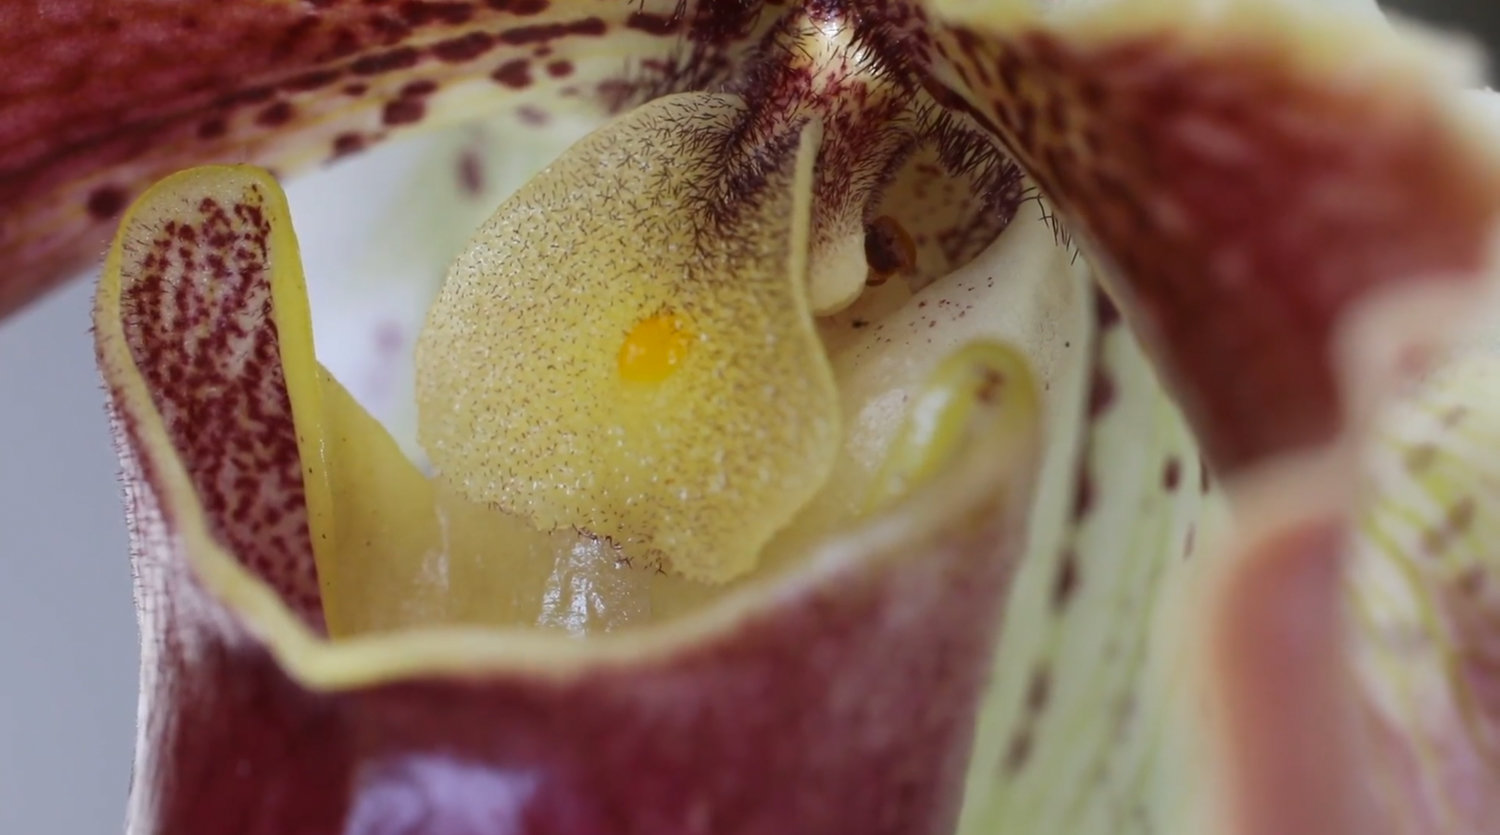 During a recent ‘Happy Hour at Home,’ viewers were offered a close-up look at a lady’s slipper orchid at the New York Botanical Garden, which has put many of its offerings online as a result of the coronavirus pandemic.